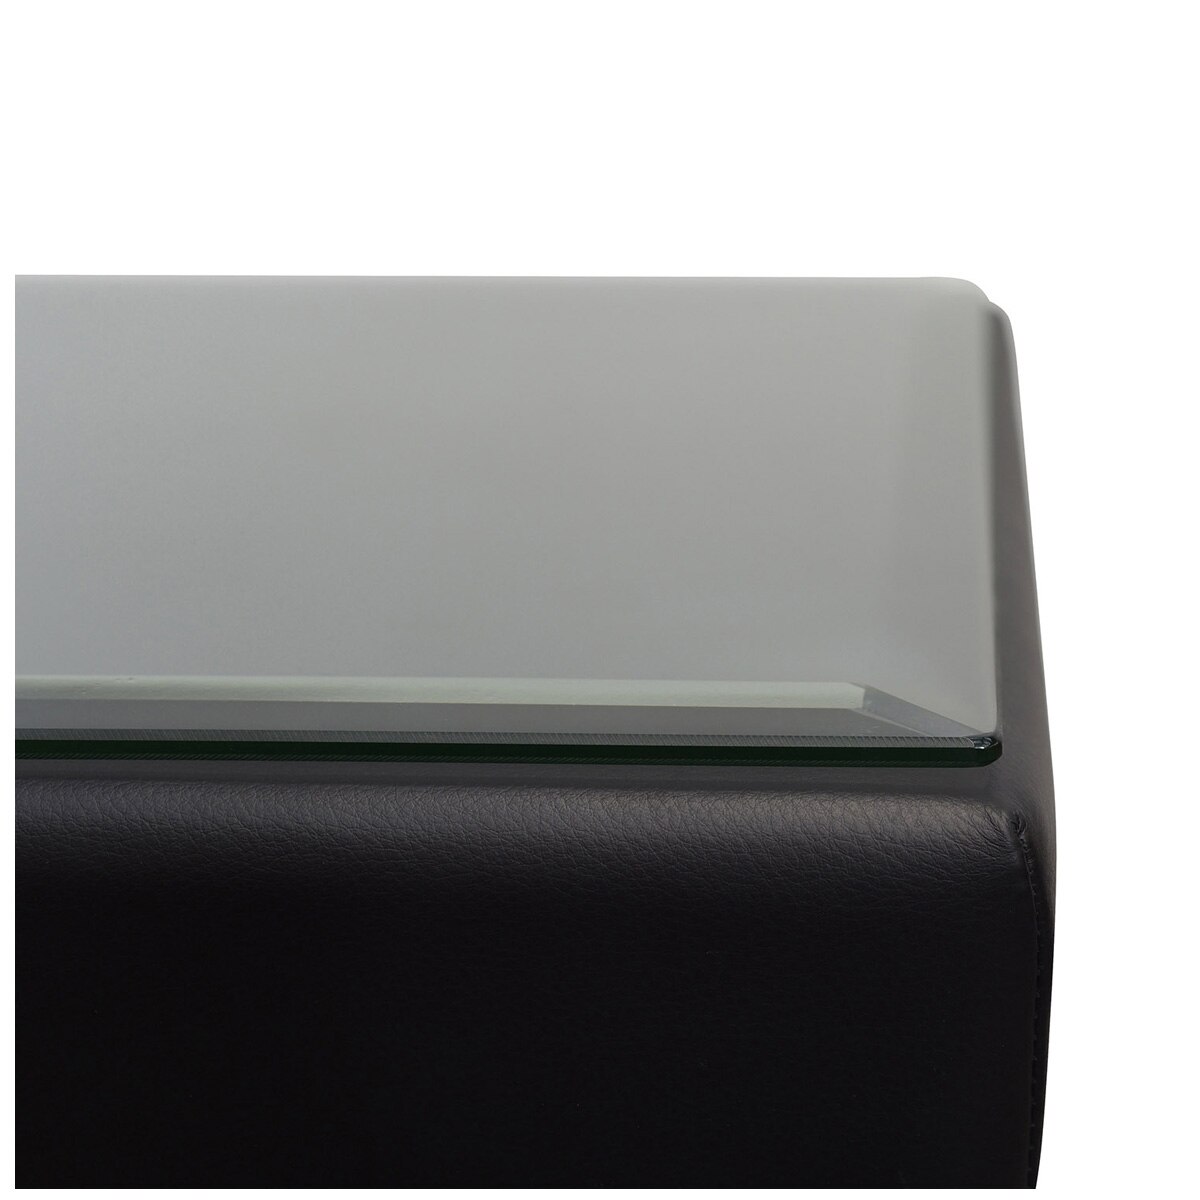 Nova Premium Onyx Leather Bedside Table with Glasstop